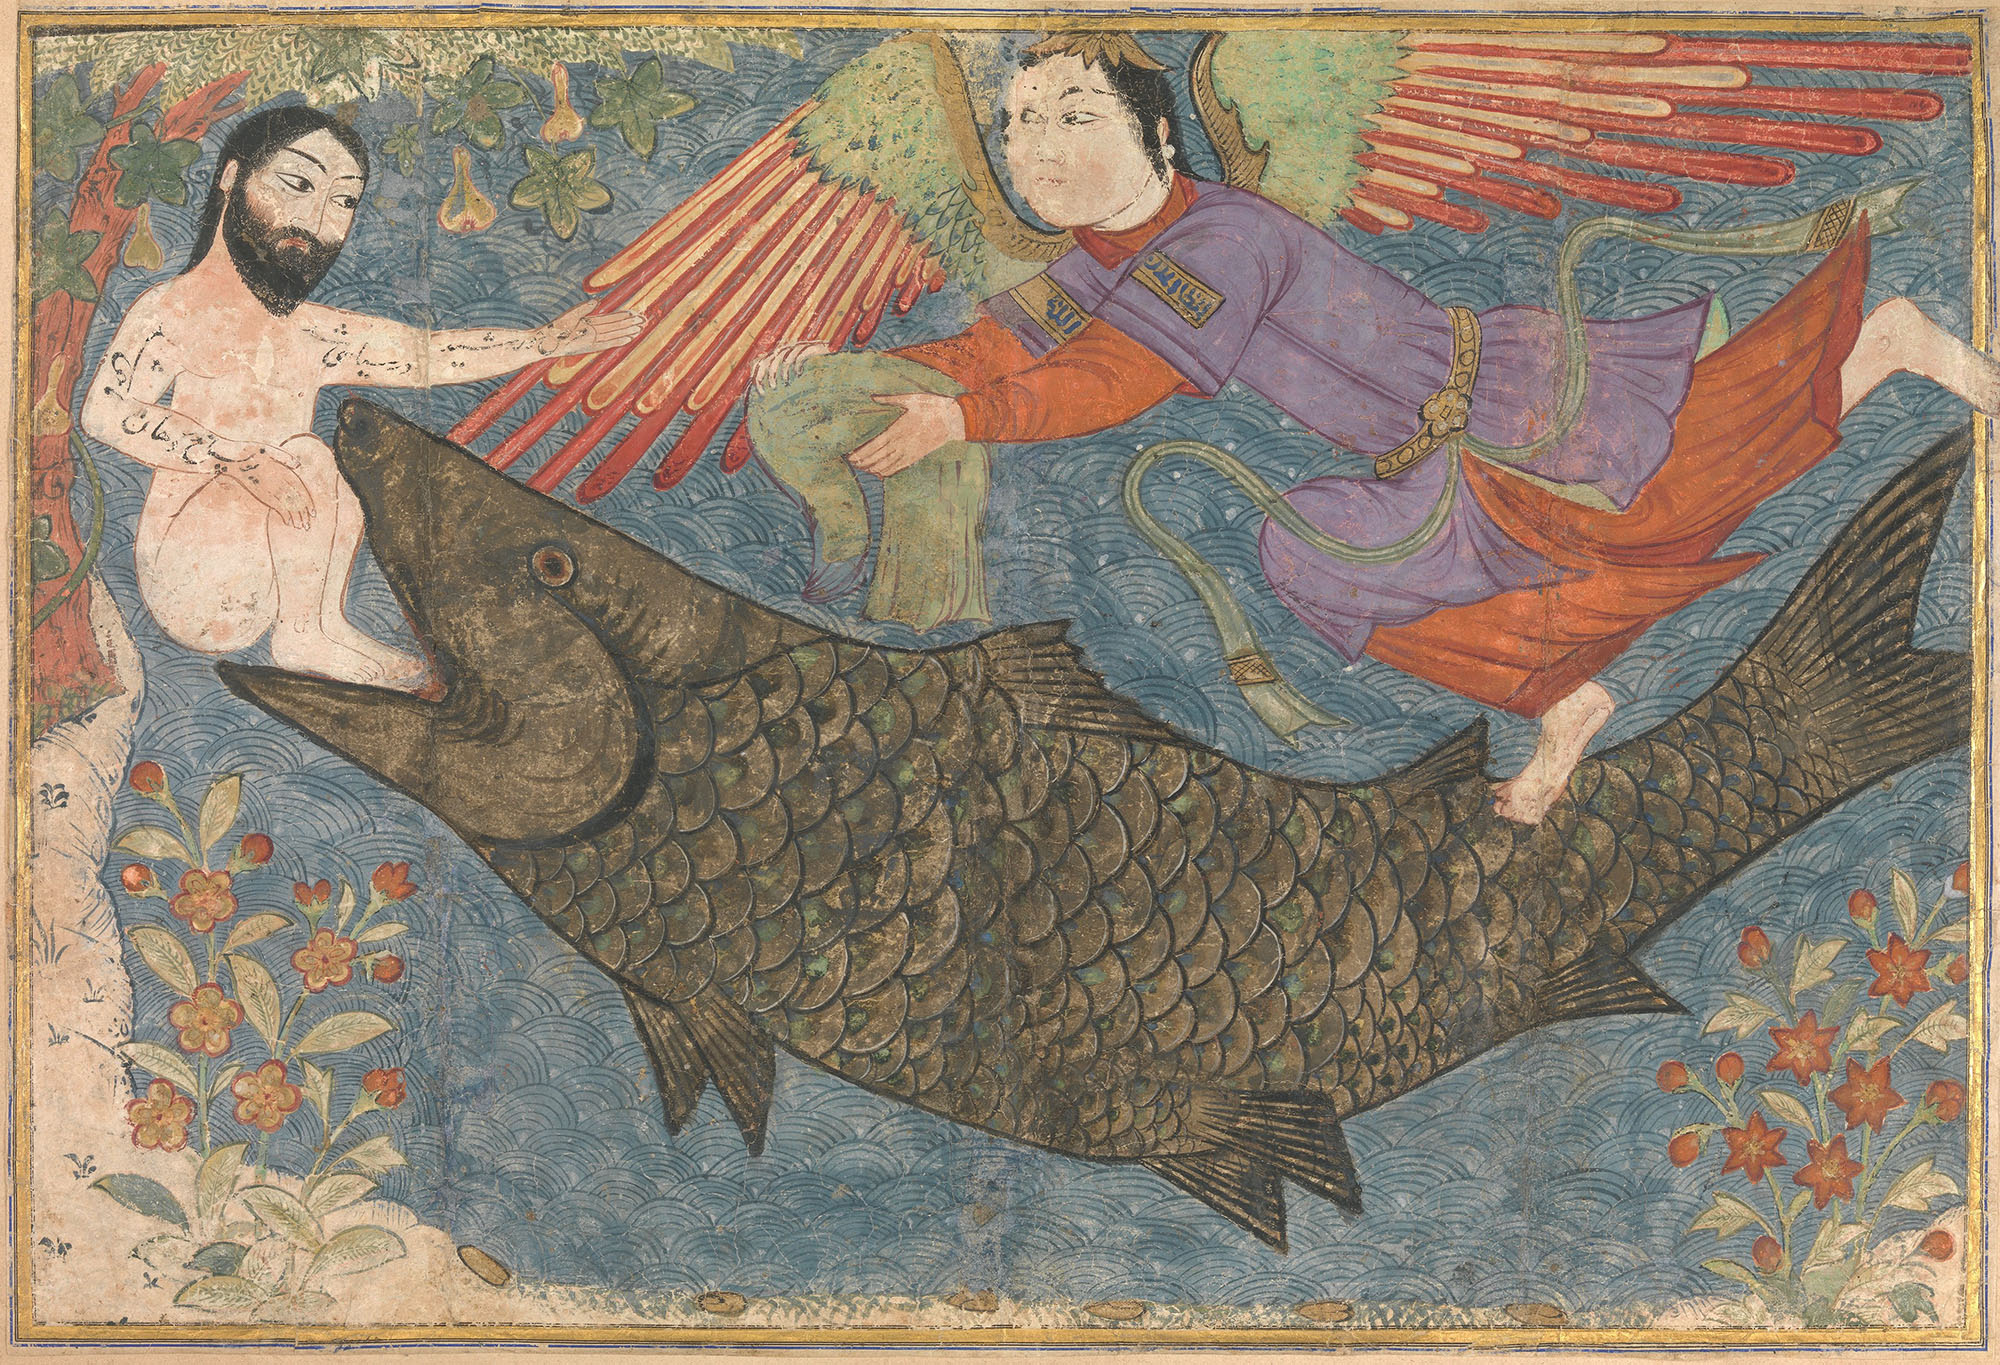 A painting of a naked man in the mouth of a fish with a winged figure above.